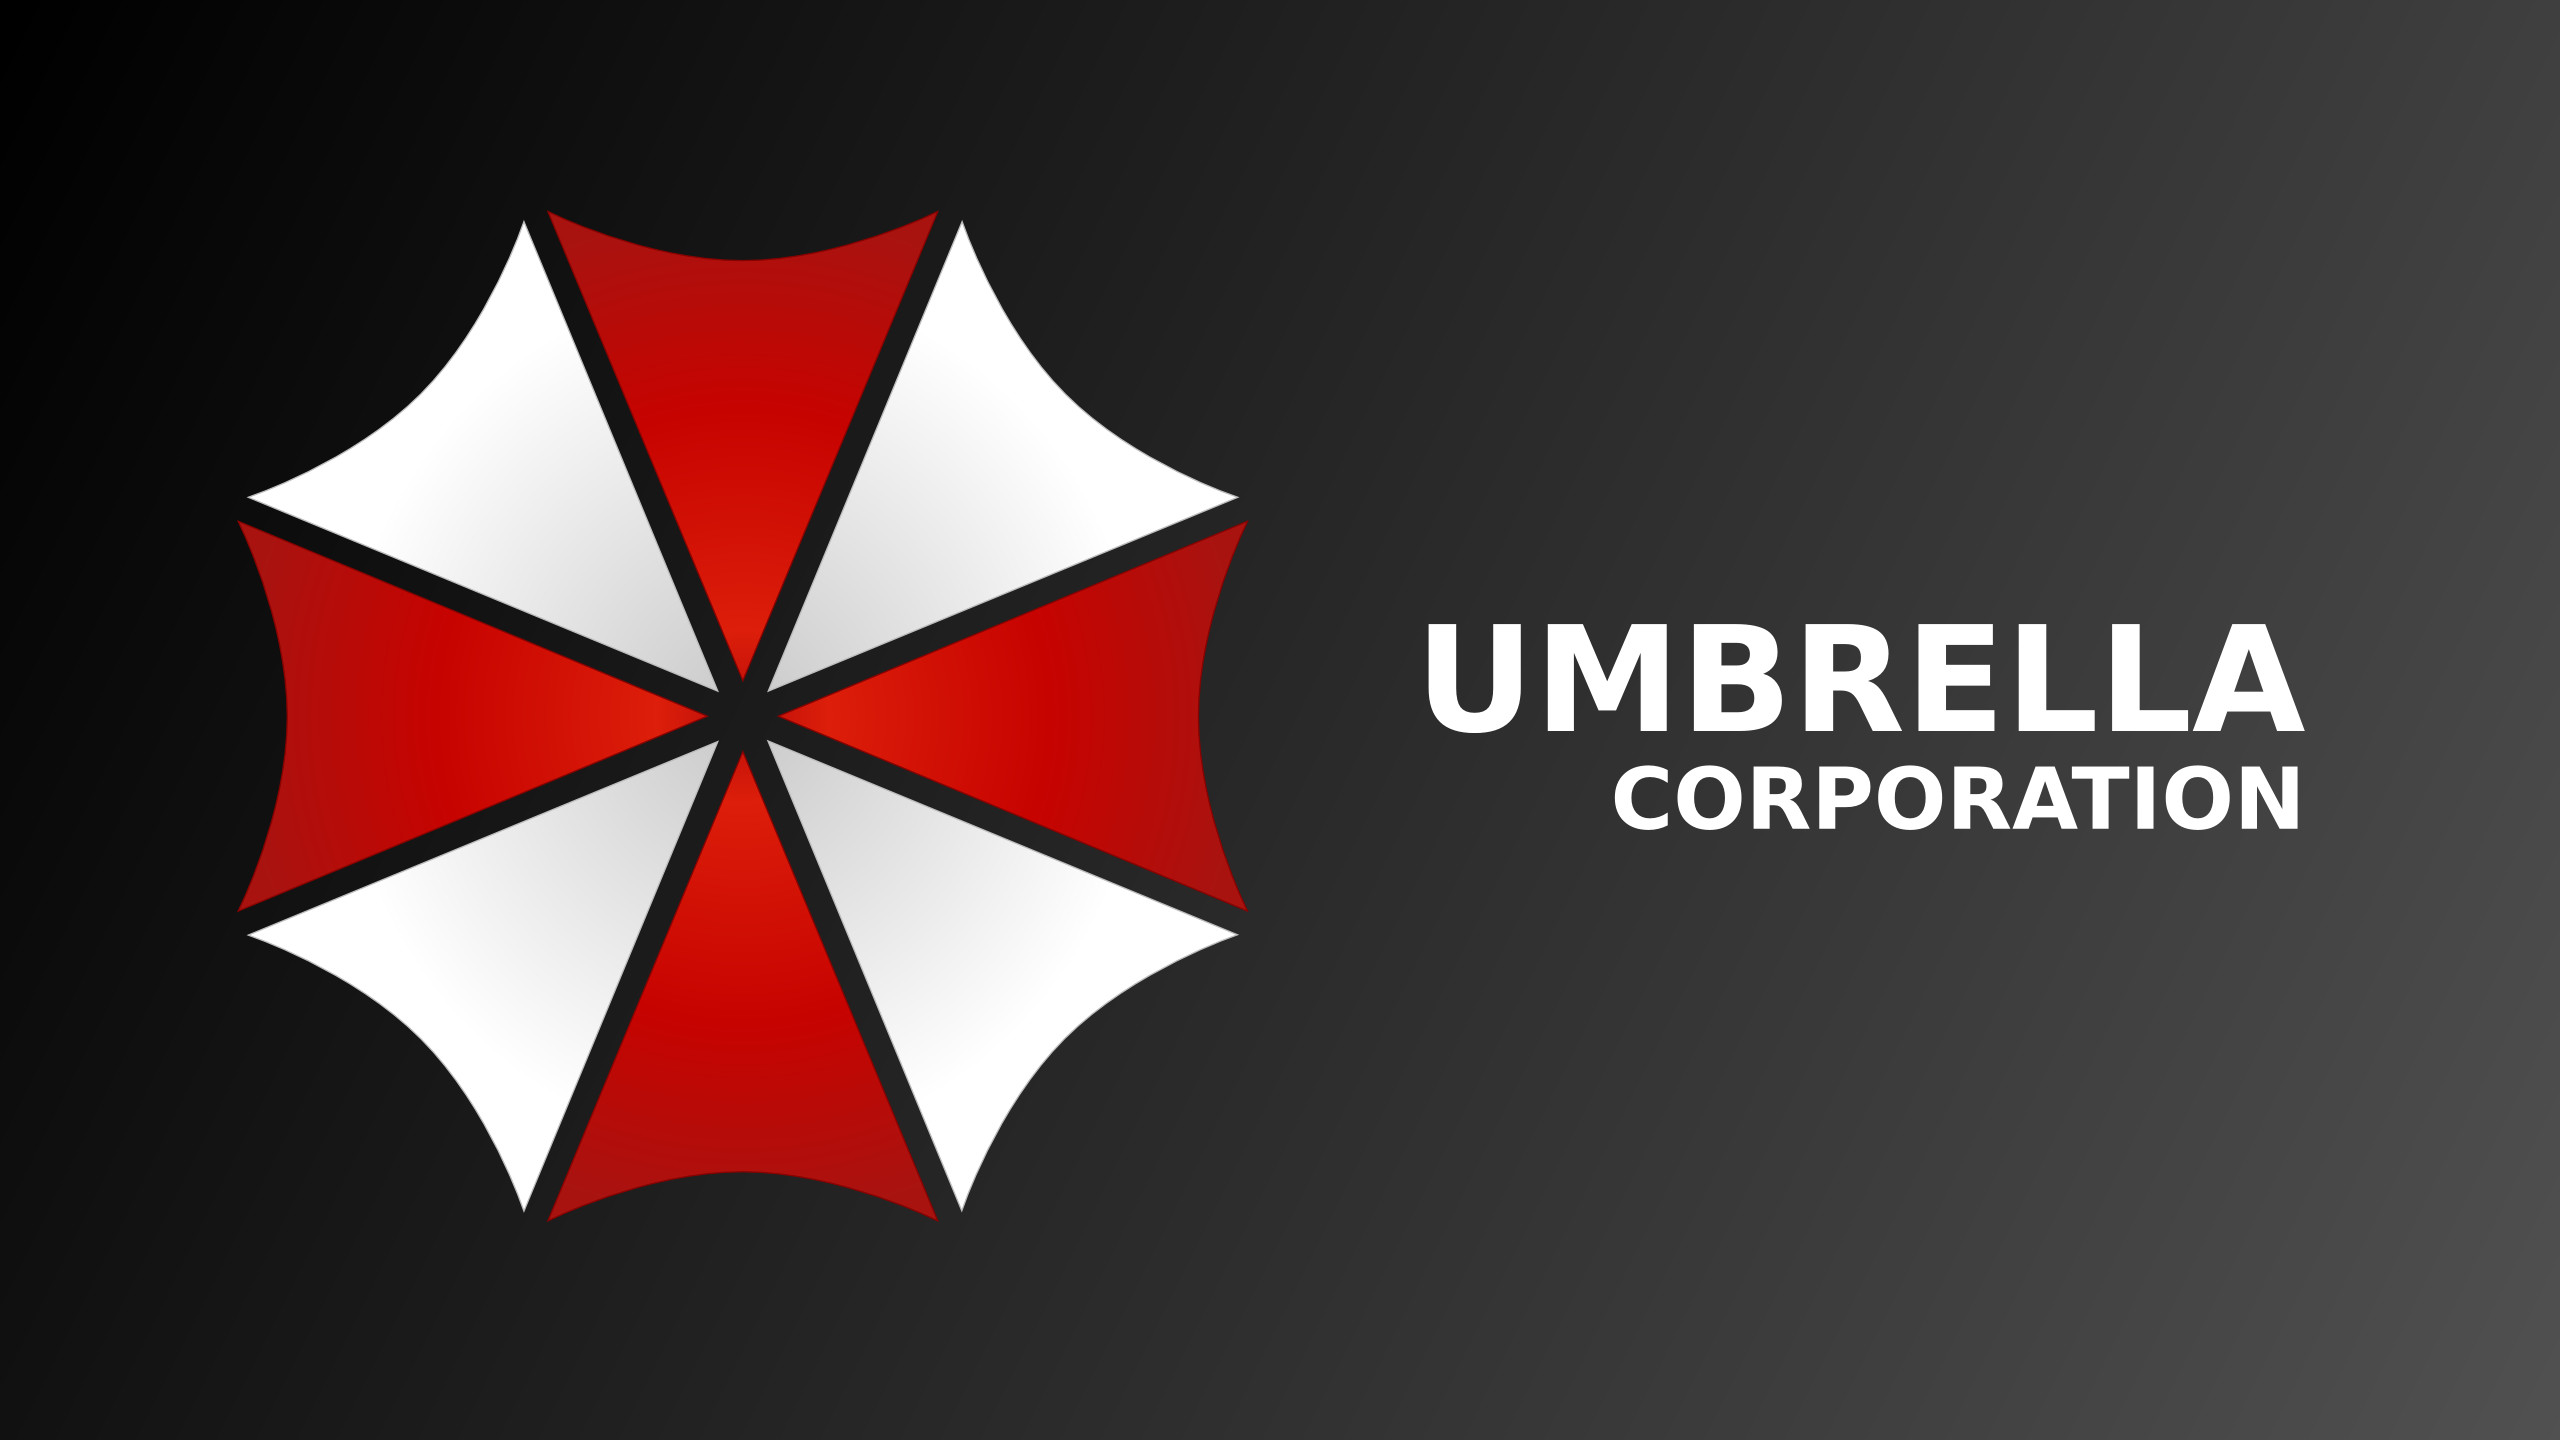 2560x1440 Umbrella Corporation Wallpaper by Sneaky-Matthew Umbrella Corporation  Wallpaper by Sneaky-Matthew